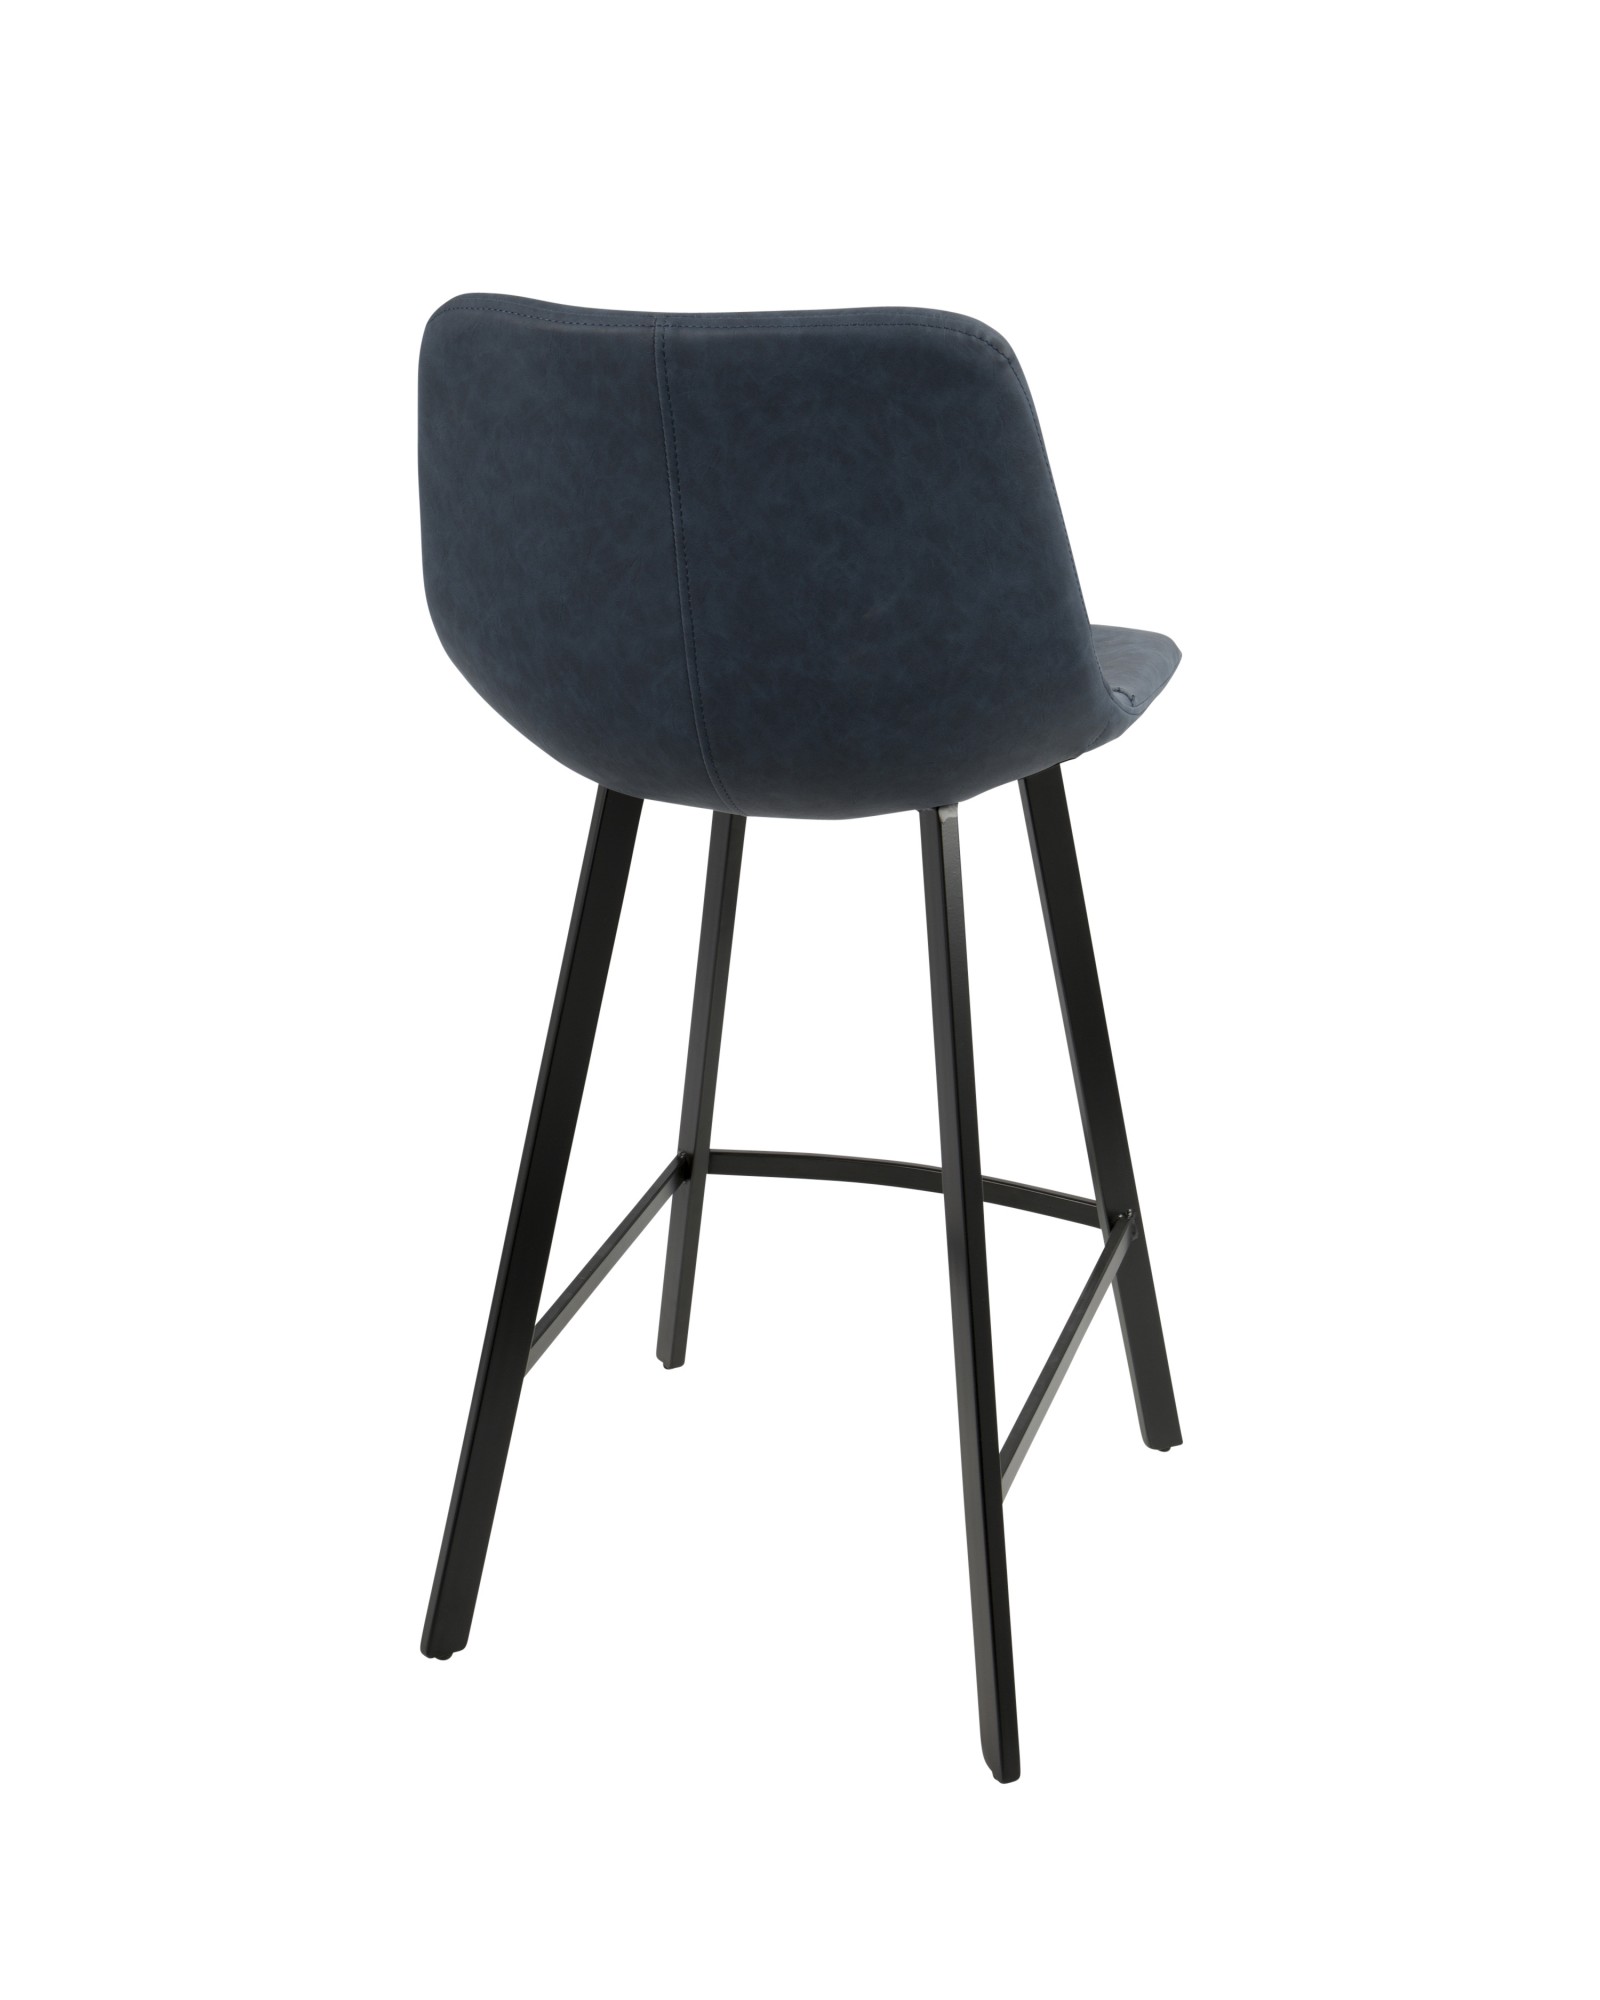 Outlaw Industrial Counter Stool in Black with Blue Faux Leather - Set of 2